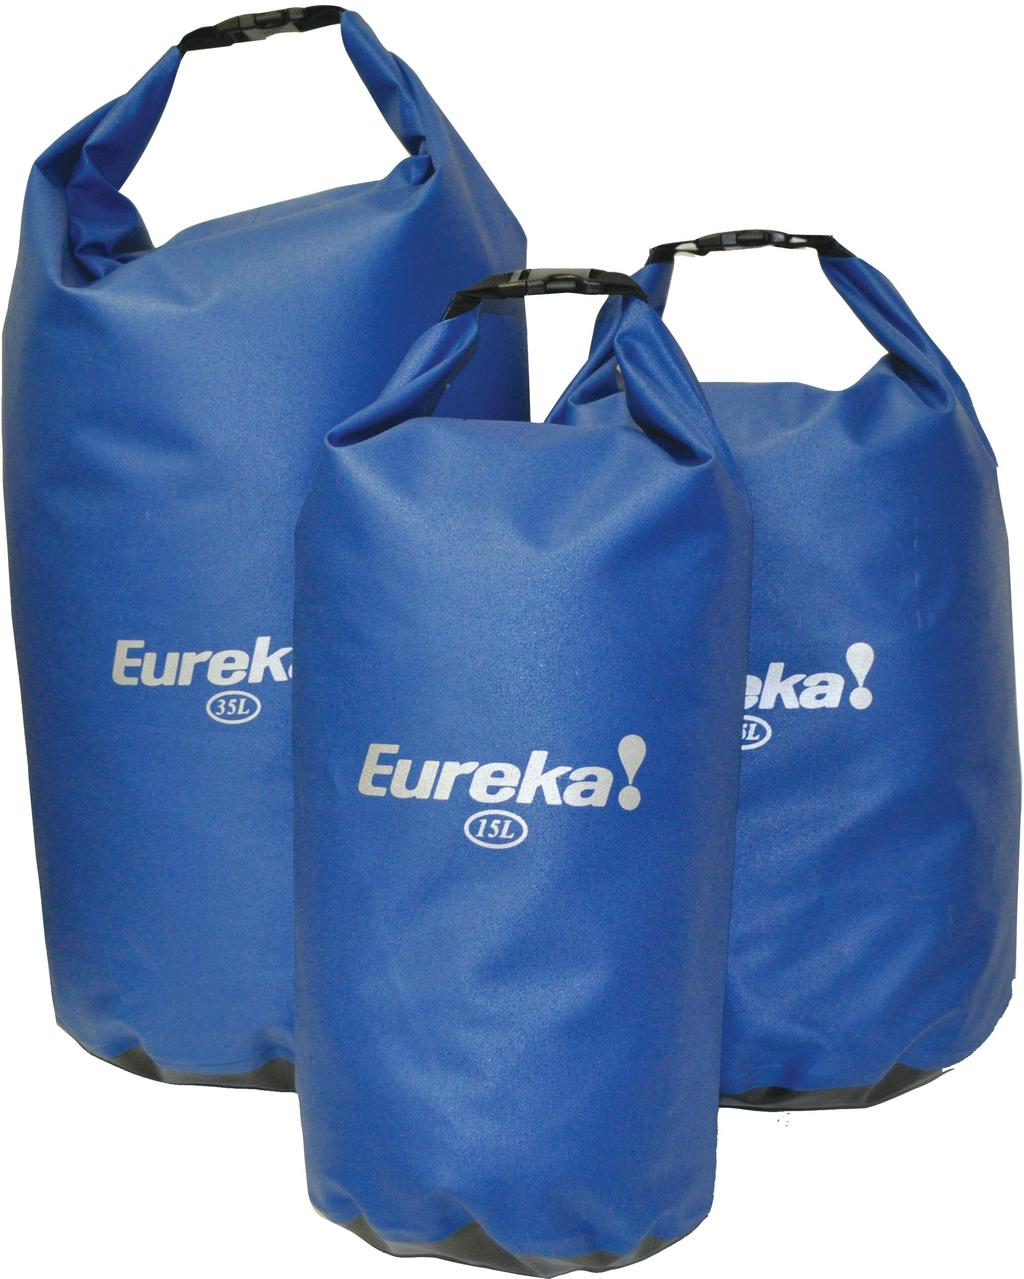 Armatech All purpose dry bag Fabricated using durable 600D polyester. Waterproof coating and welded seams Double seal roll top closure.